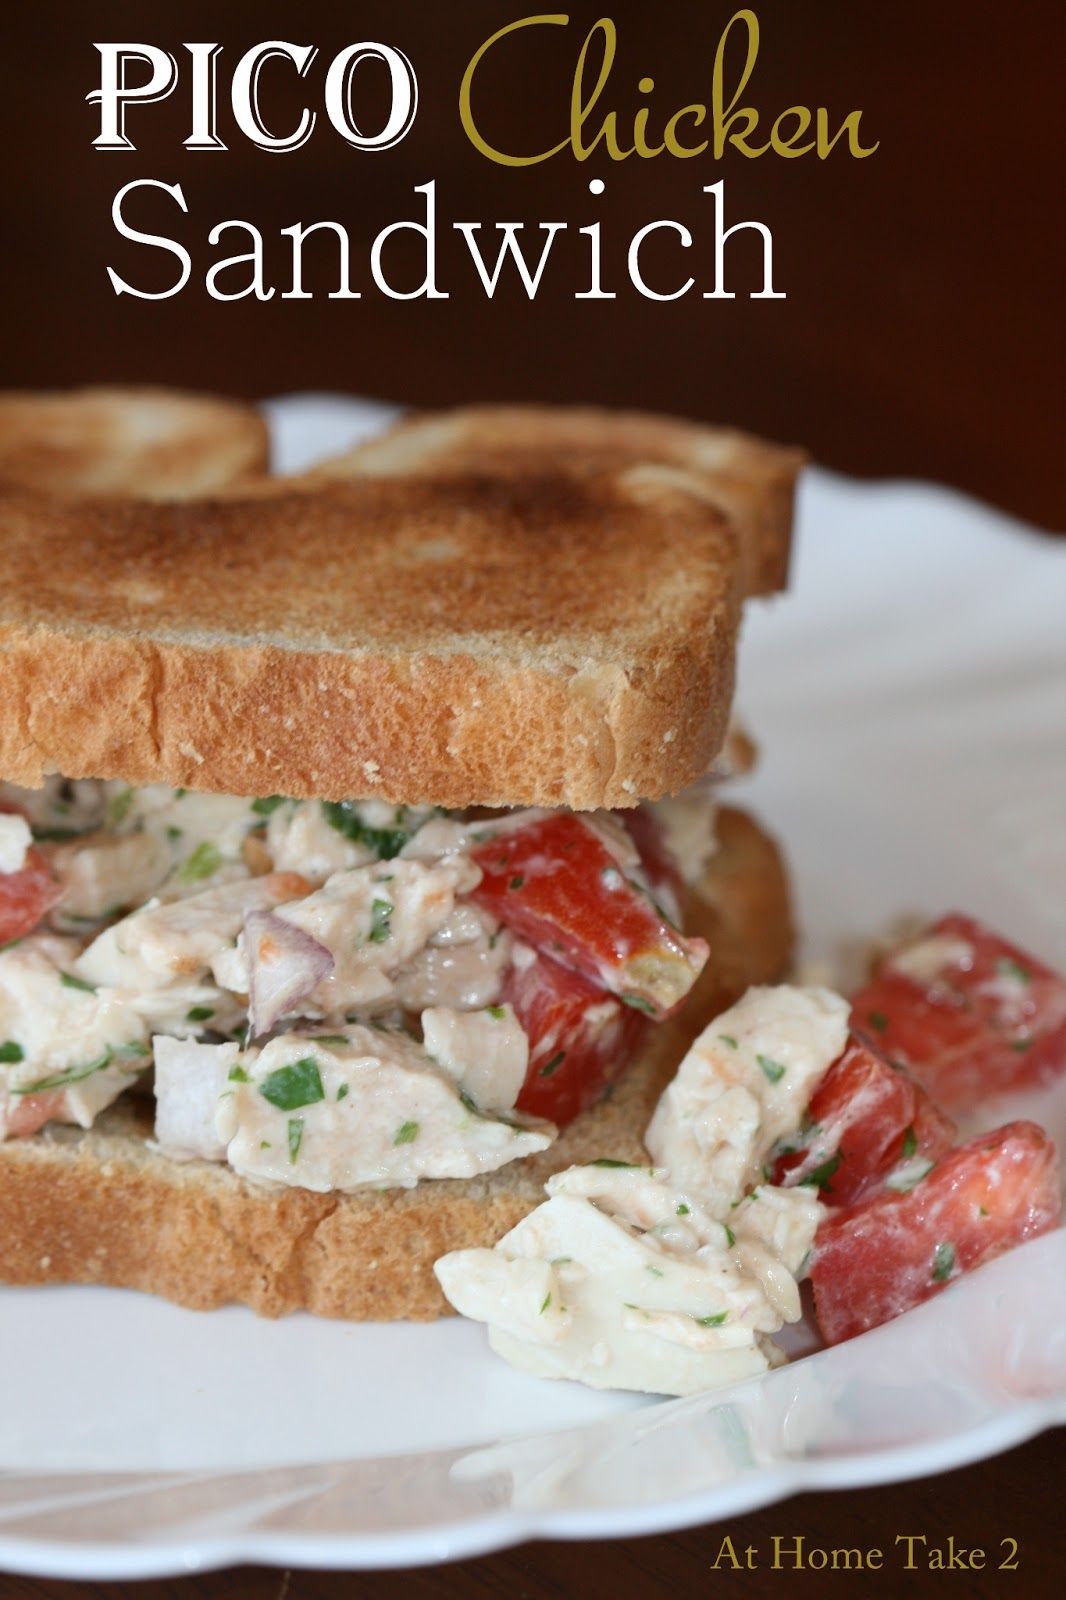 Low Fat Chicken Salad Sandwich Recipes
 Pico Chicken Sandwich With images